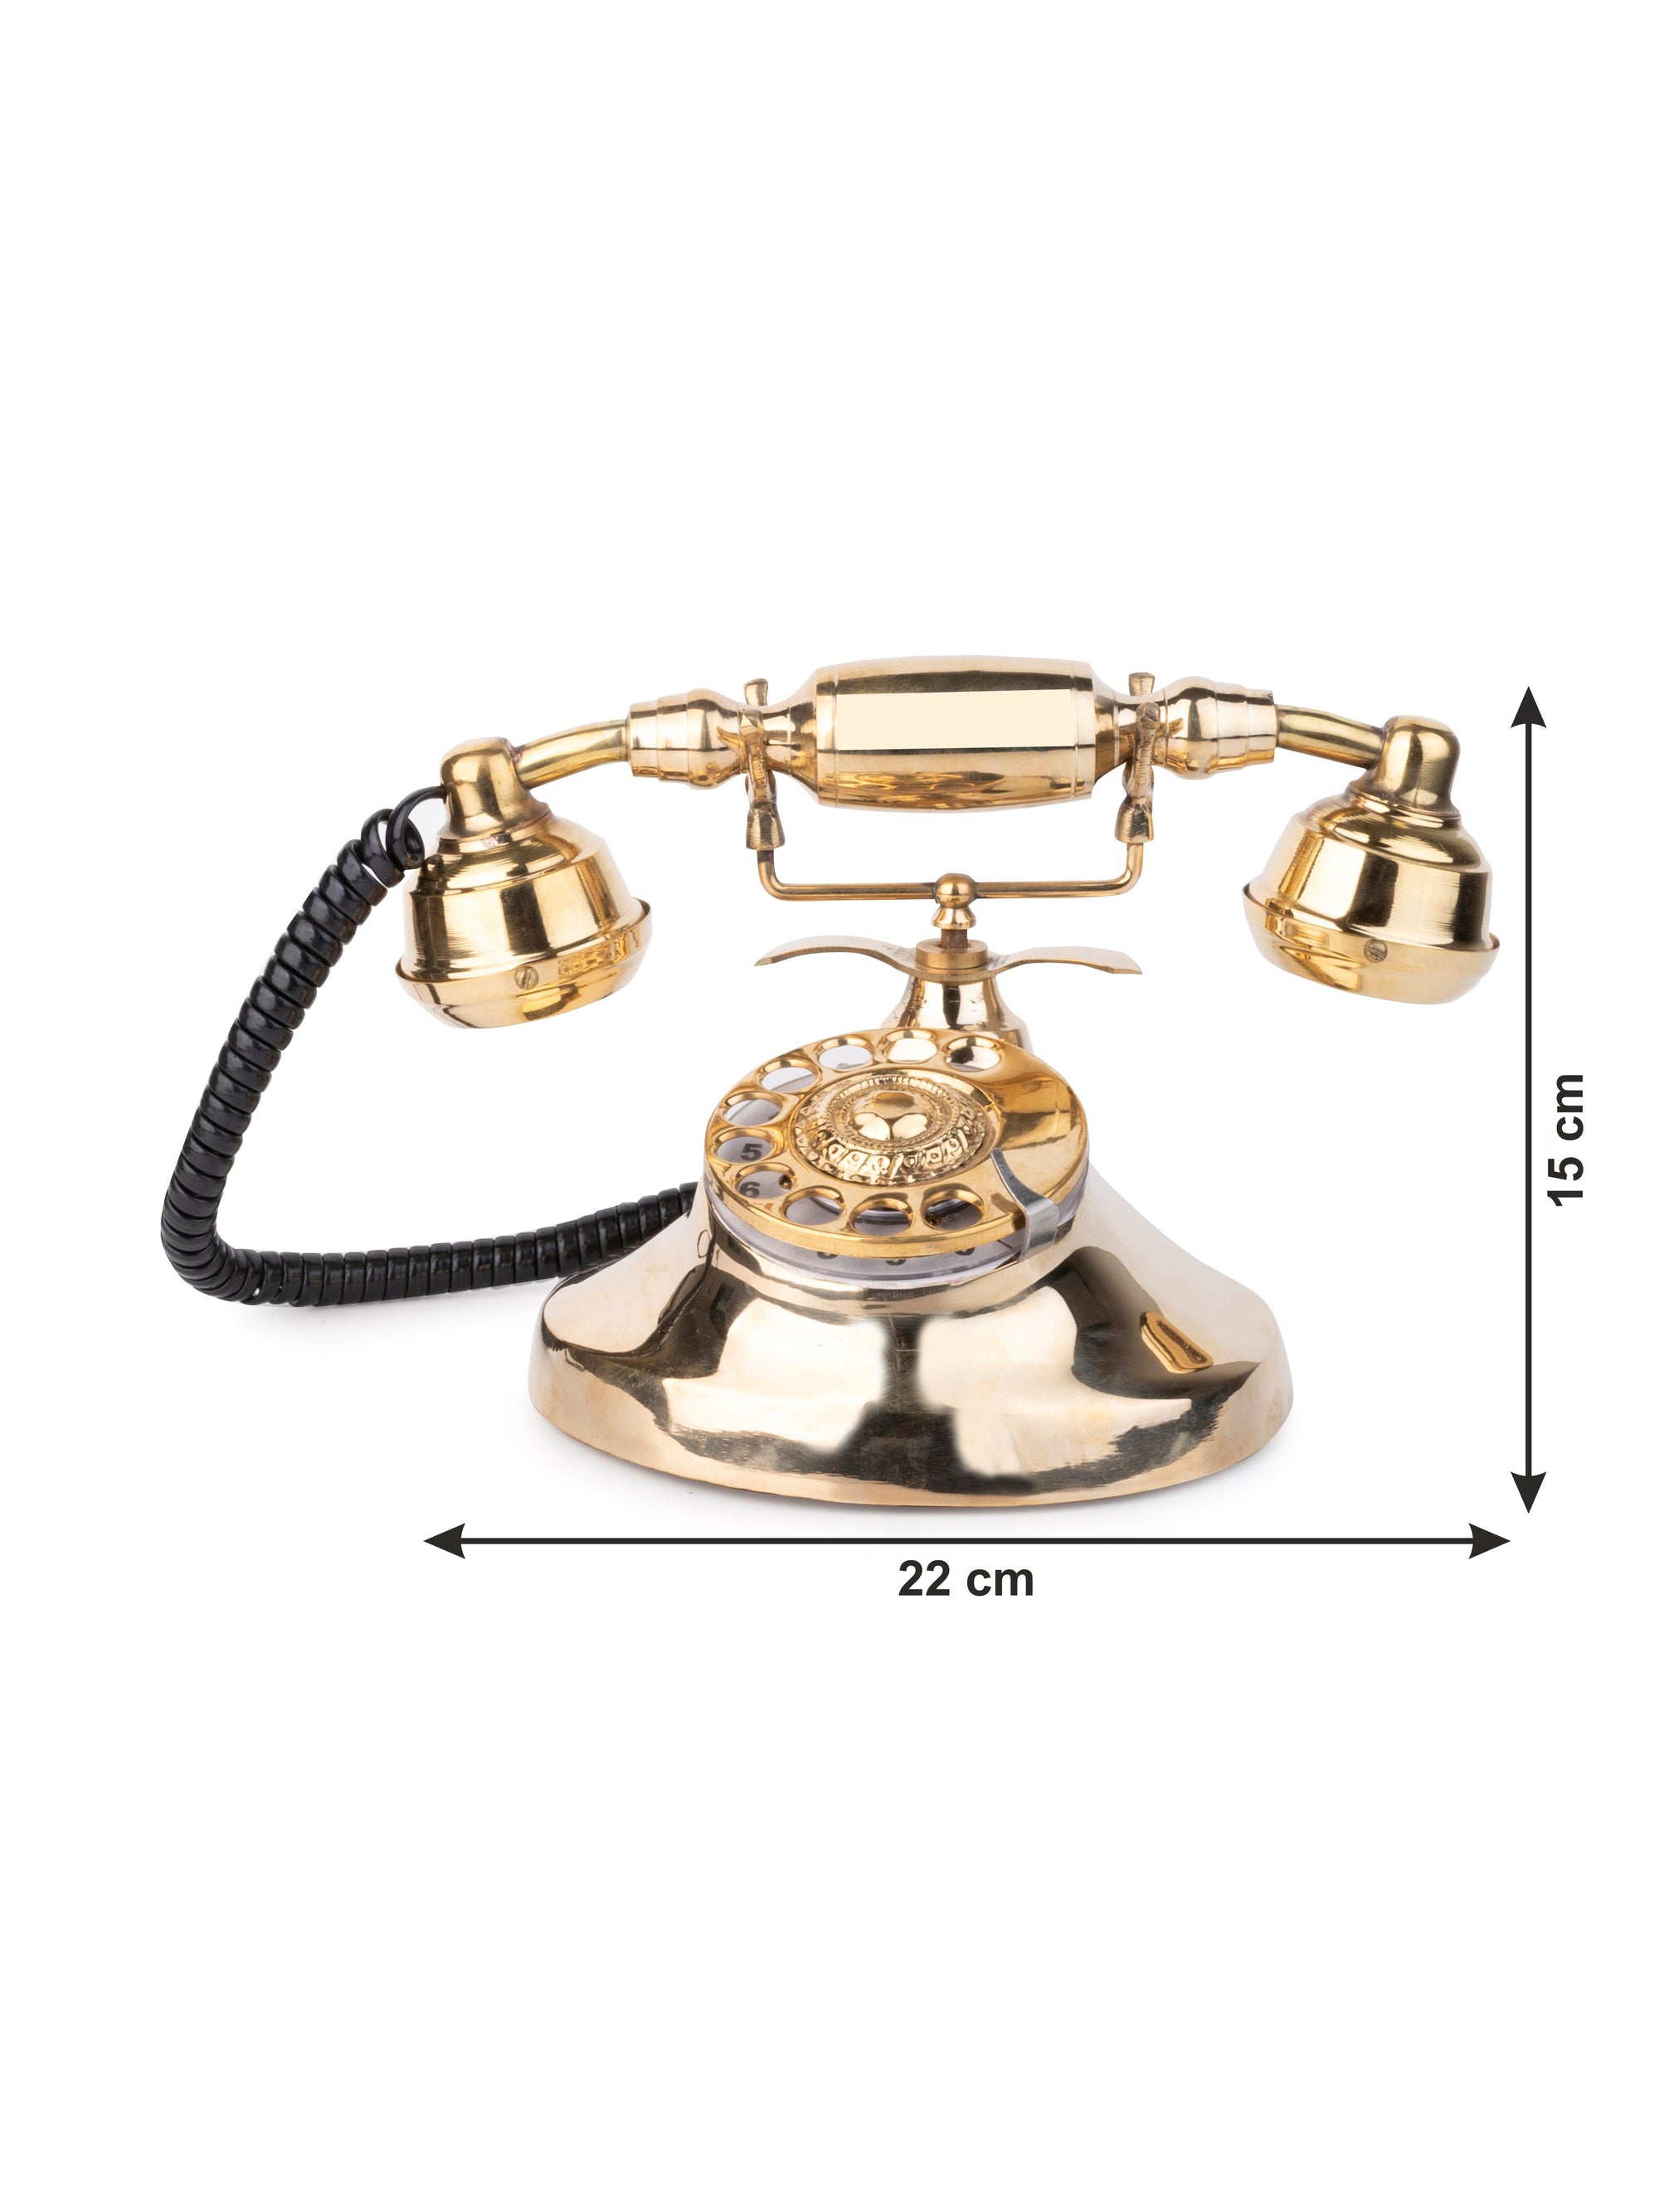 Shiny Brass Vintage Rotary Dial Landline Phone for Home Office Decor